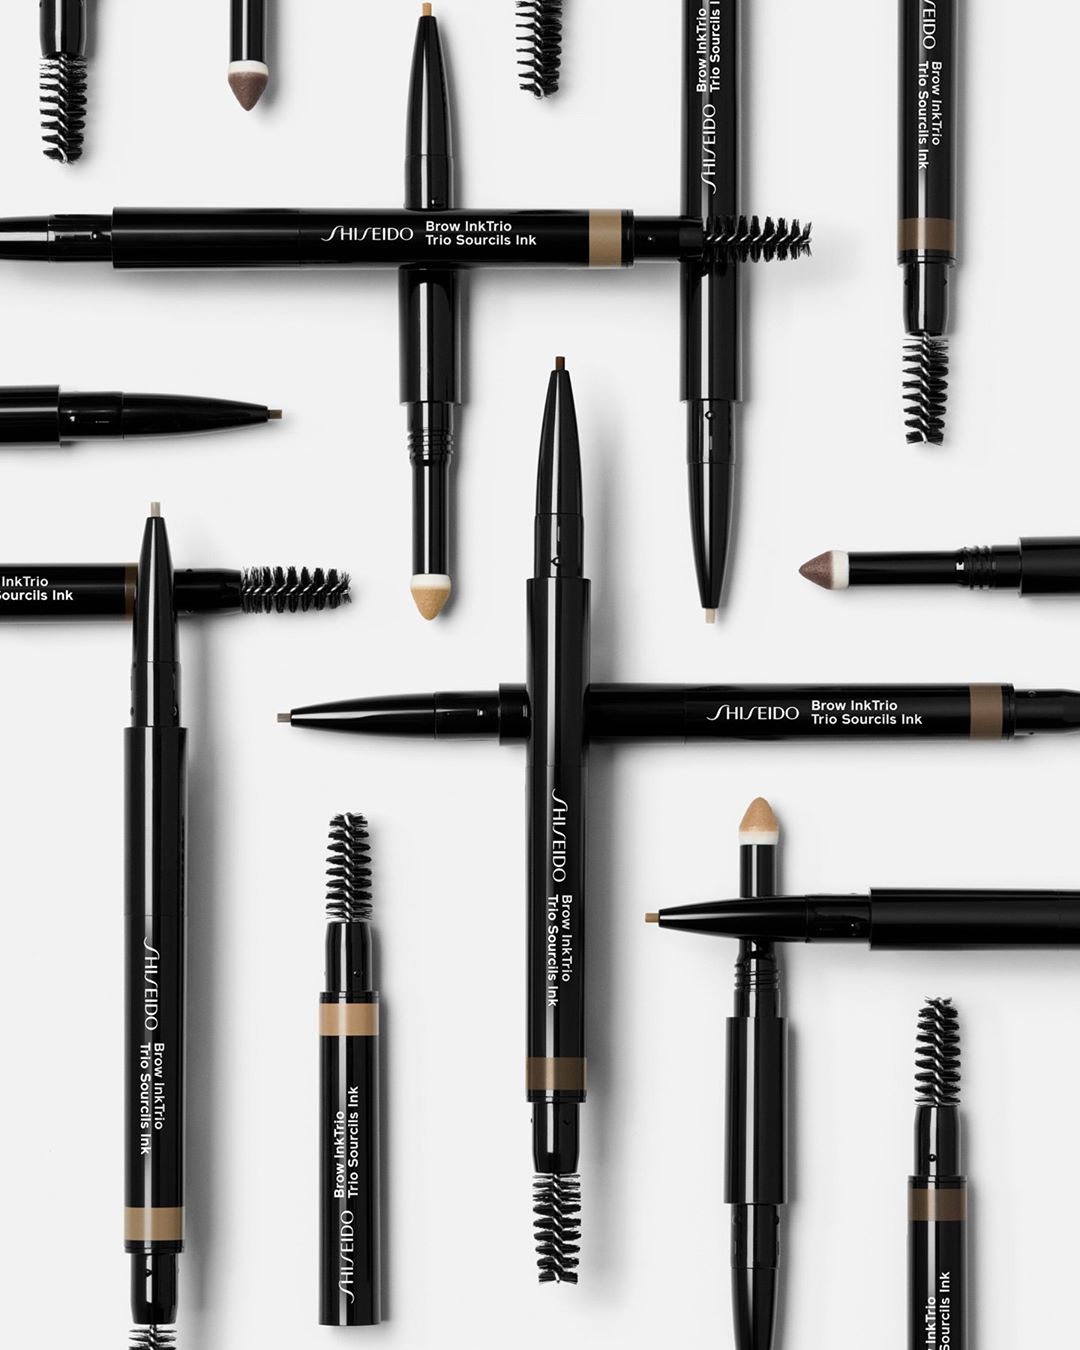 SHISEIDO - Our Brow InkTrio is a global beauty icon. A few reasons why this 3-in-1 tool is a best-seller around the world:⁣
⁣
✔️Ultra-slim, matte pencil produces hair-like strokes.⁣
✔️Pre-loaded spong...